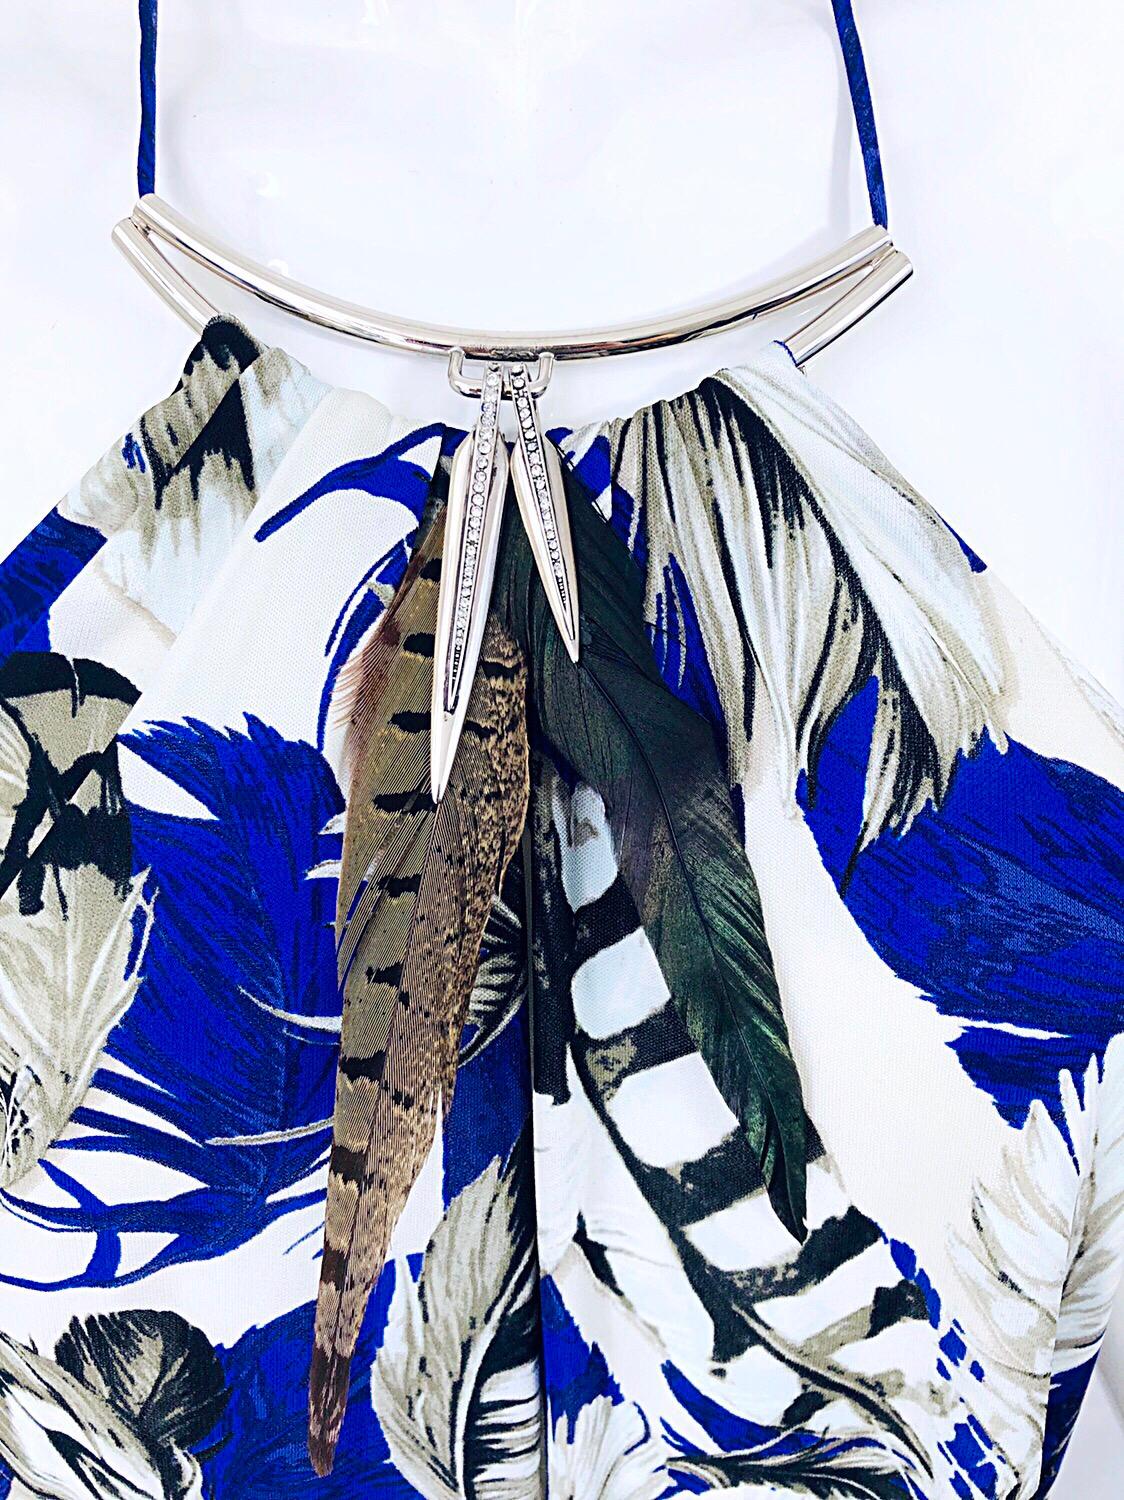 Sexy late 90s vintage ROBERTO CAVALLI feathers and rhinestones viscose jersey handkerchief hem halter dress! Features bright cobalt blue mixed with white and black throughout. Real feathers at center neck with silver rhinestone encrusted pendants at